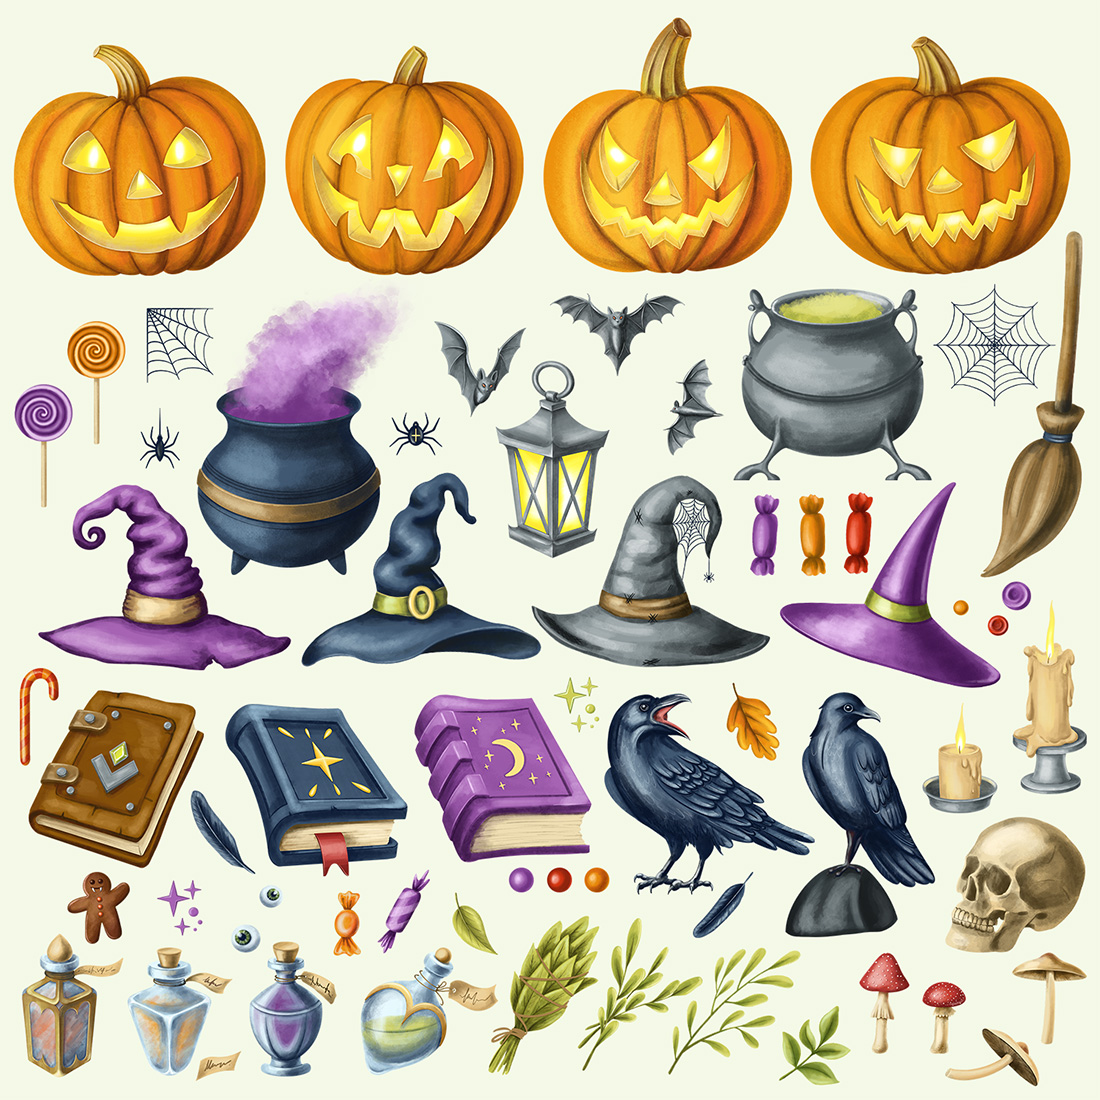 Happy Halloween collections preview image.